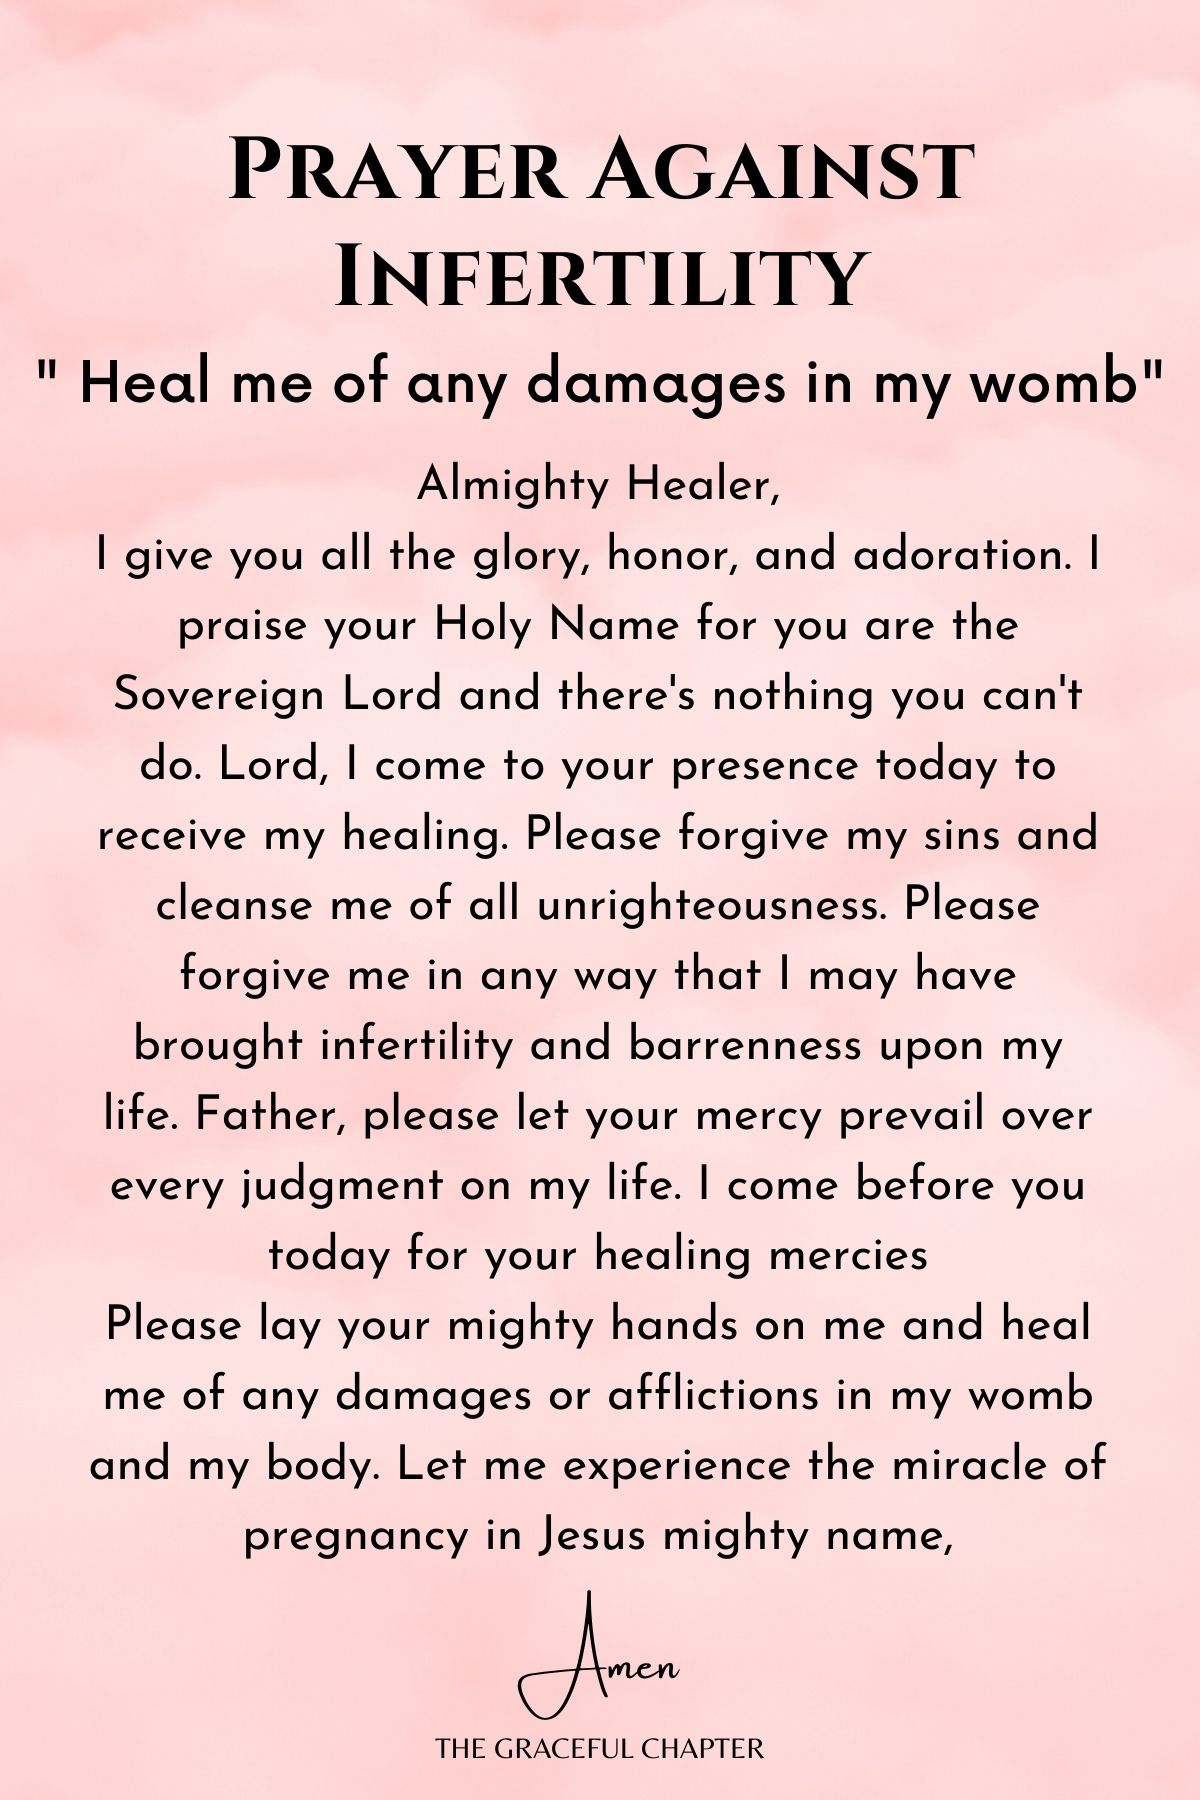  Heal me of any damages or afflictions on my womb 